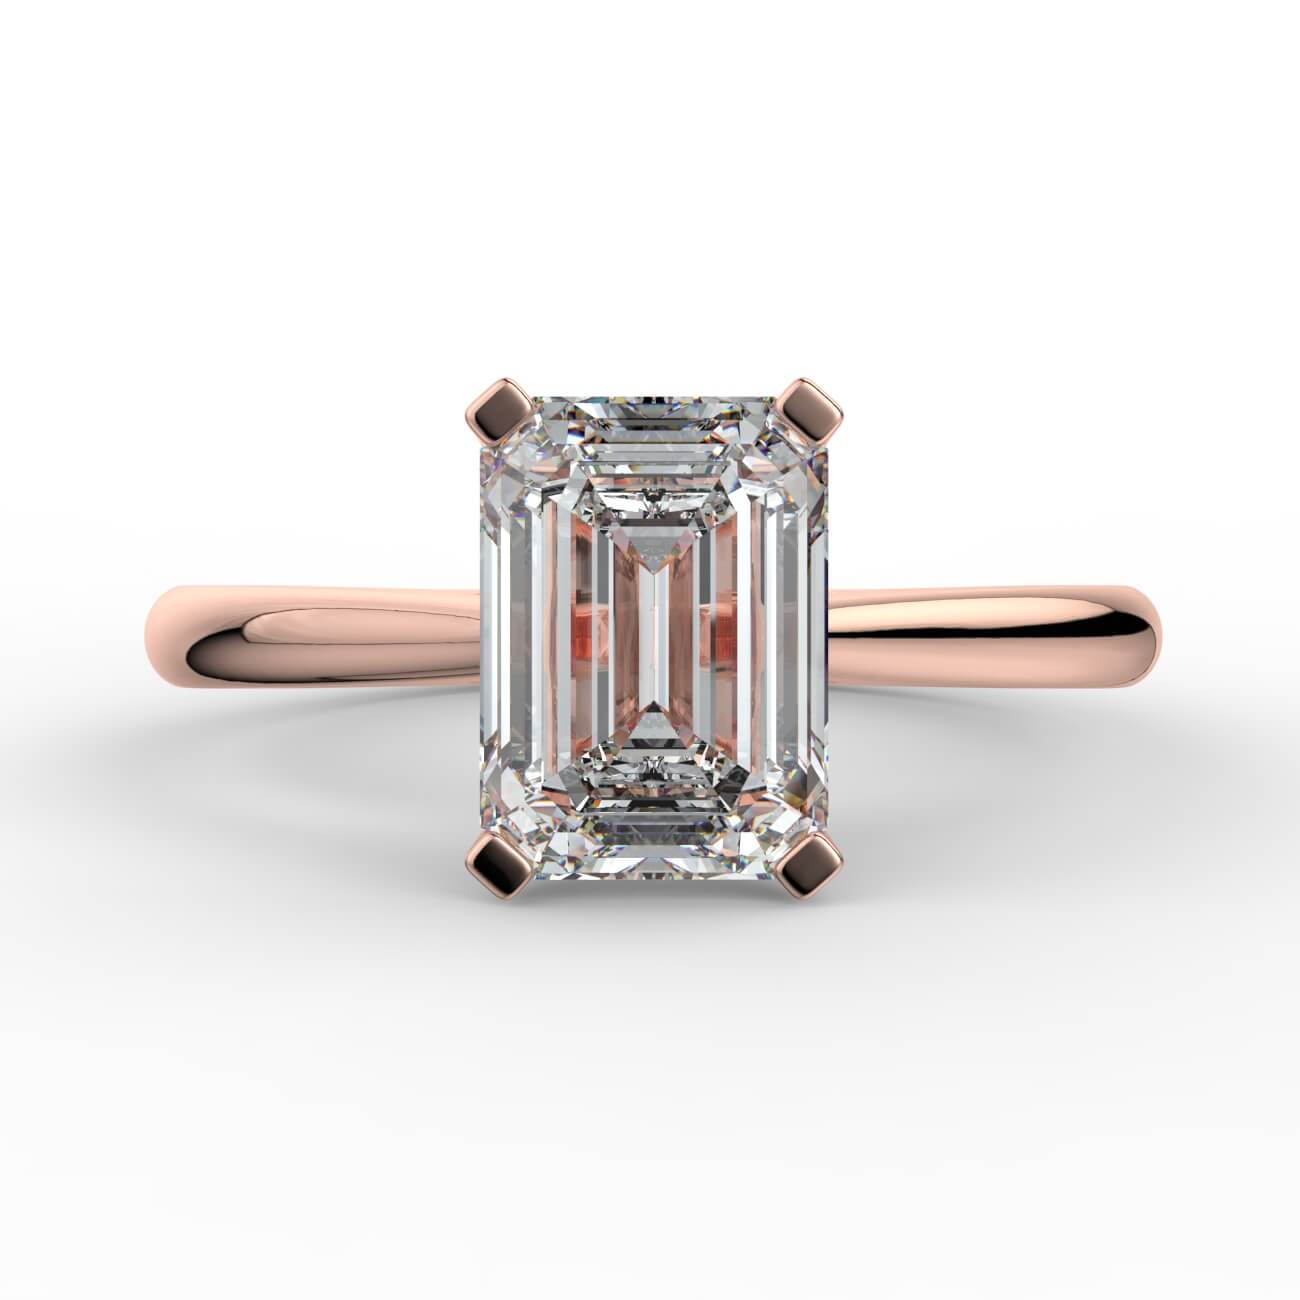 Emerald cut diamond cathedral engagement ring in rose gold – Australian Diamond Network